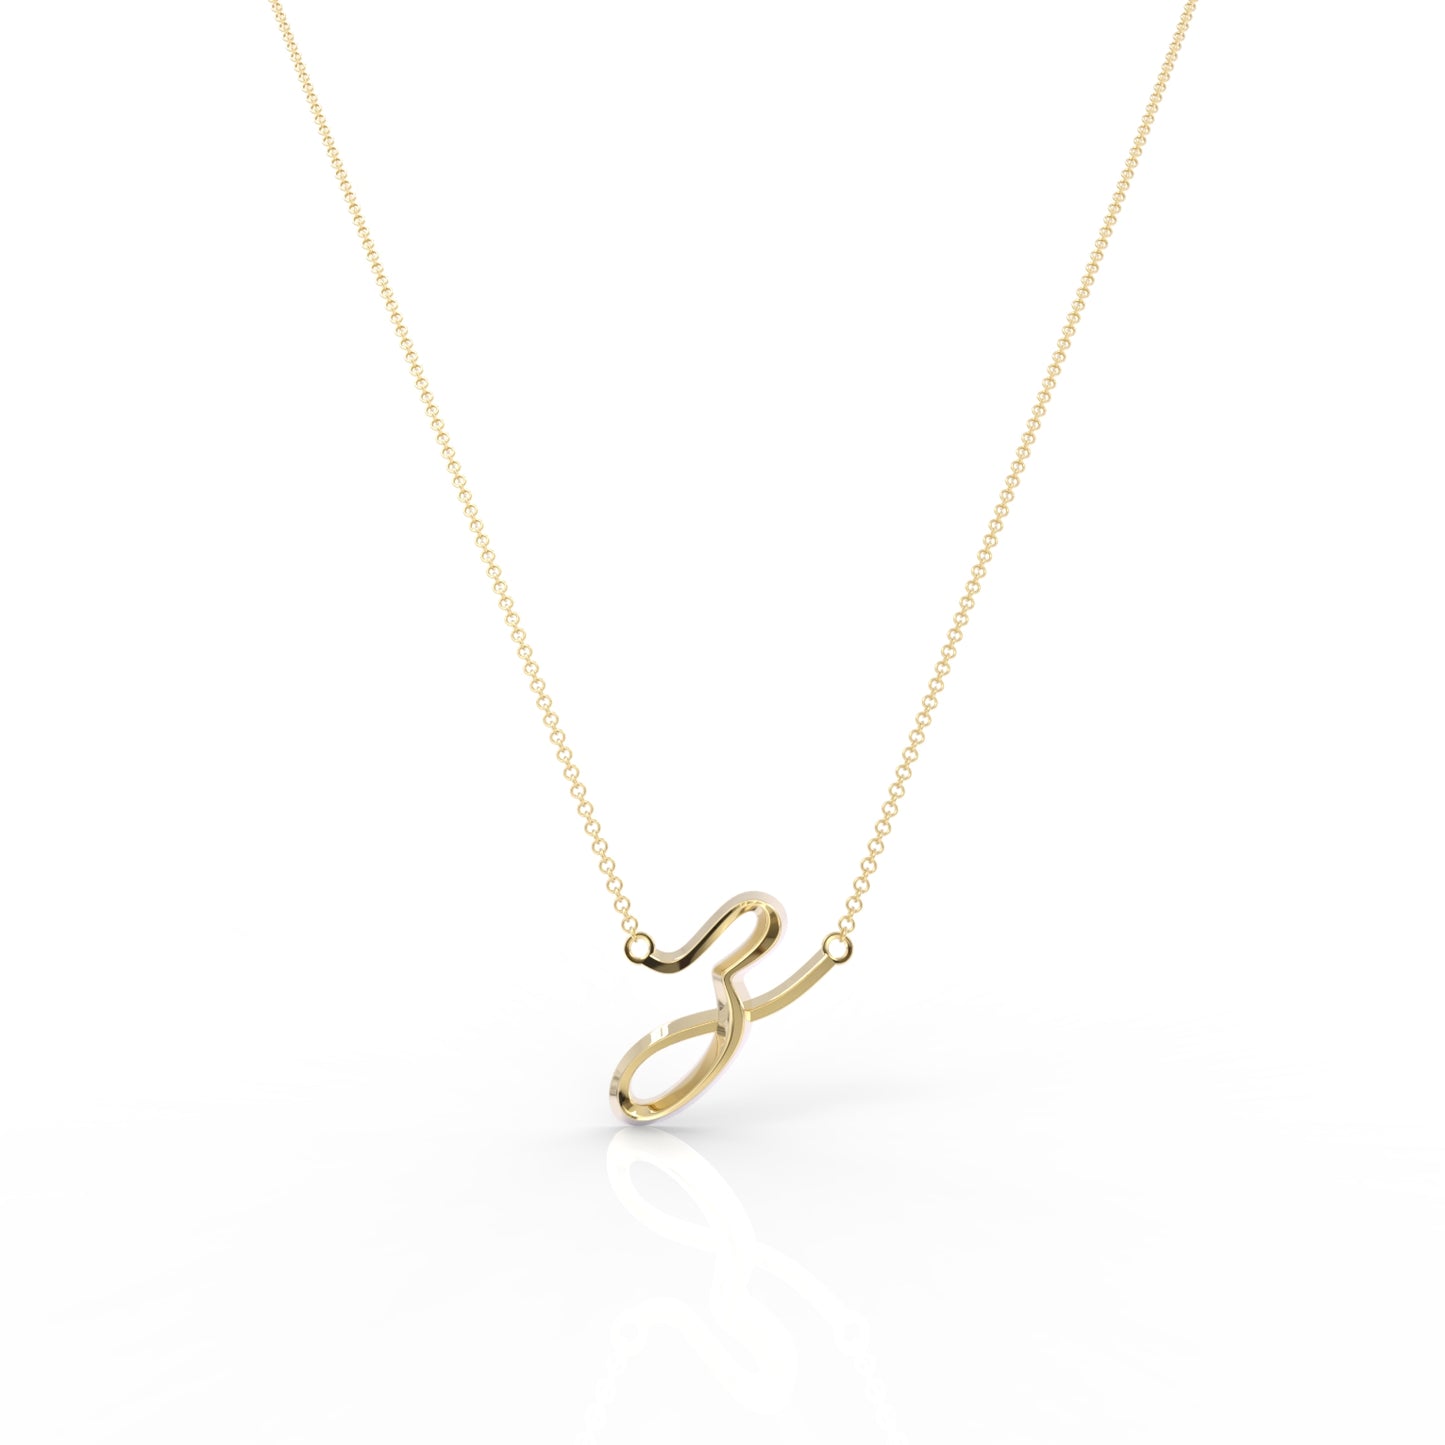 The Love Collect - "Z" Necklace